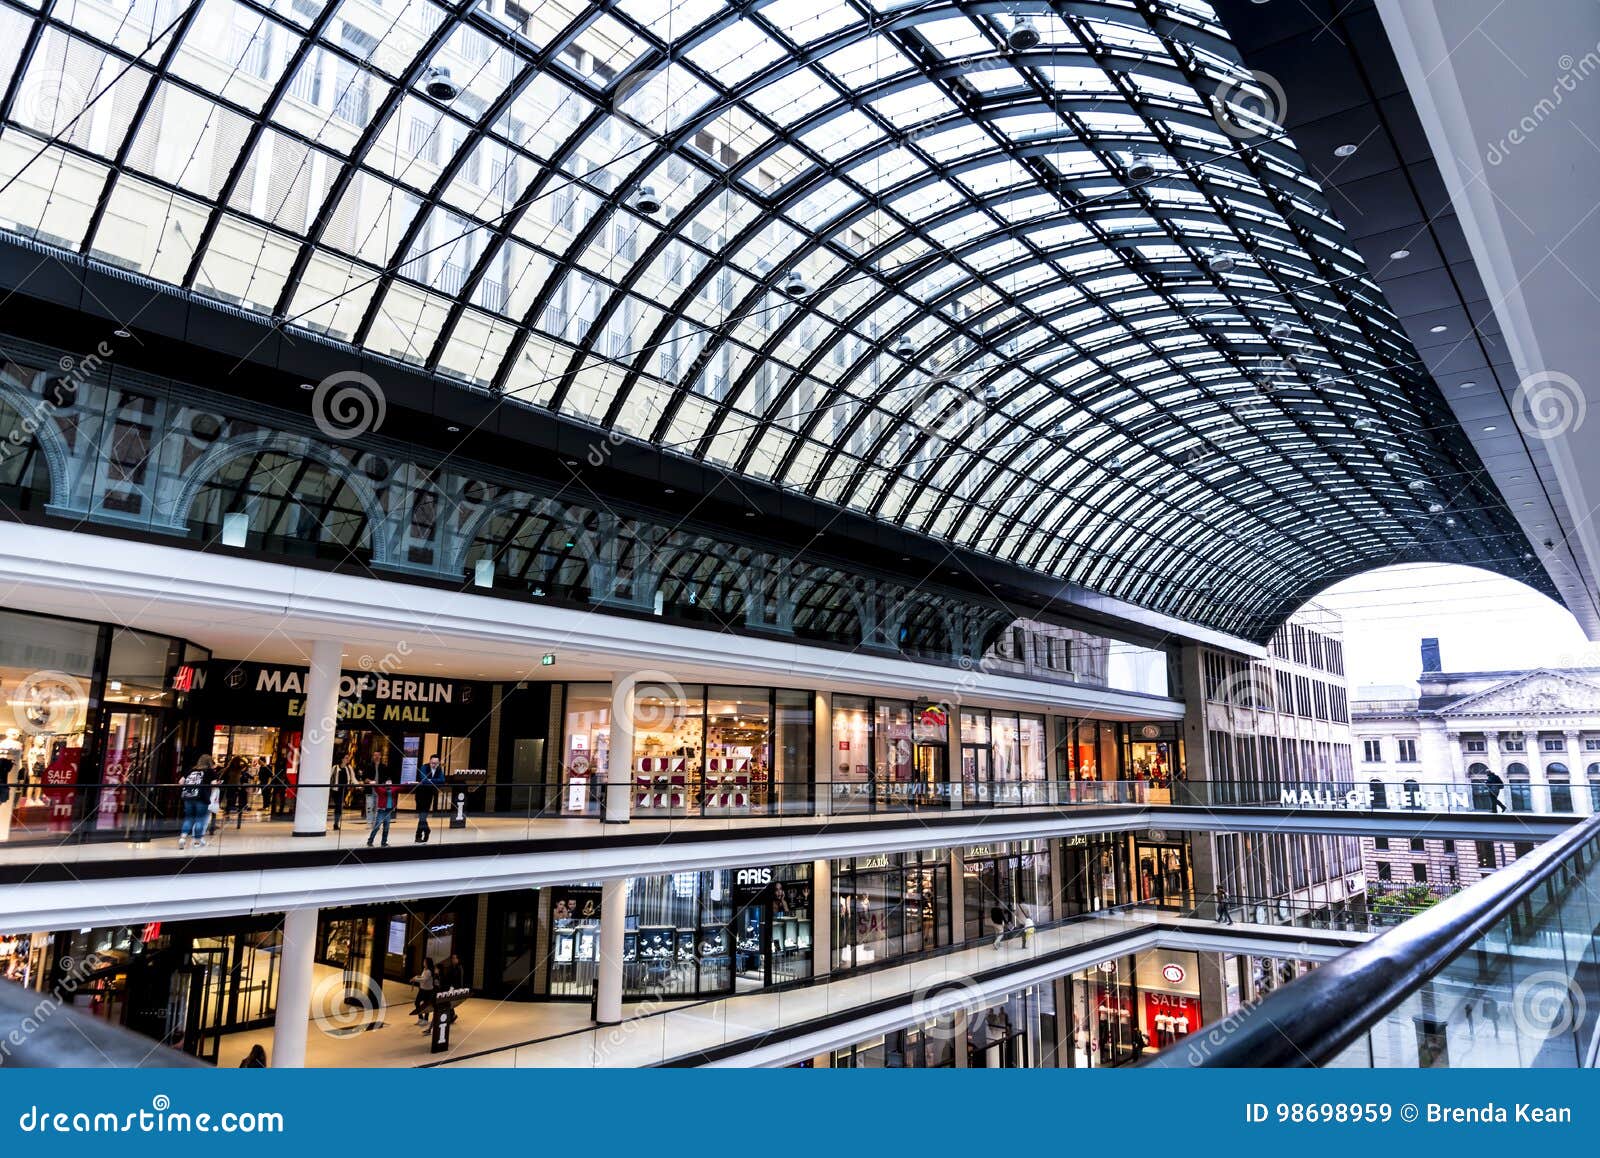 The Huge Complex of the Mall of Berlin is Located Near the Berlin